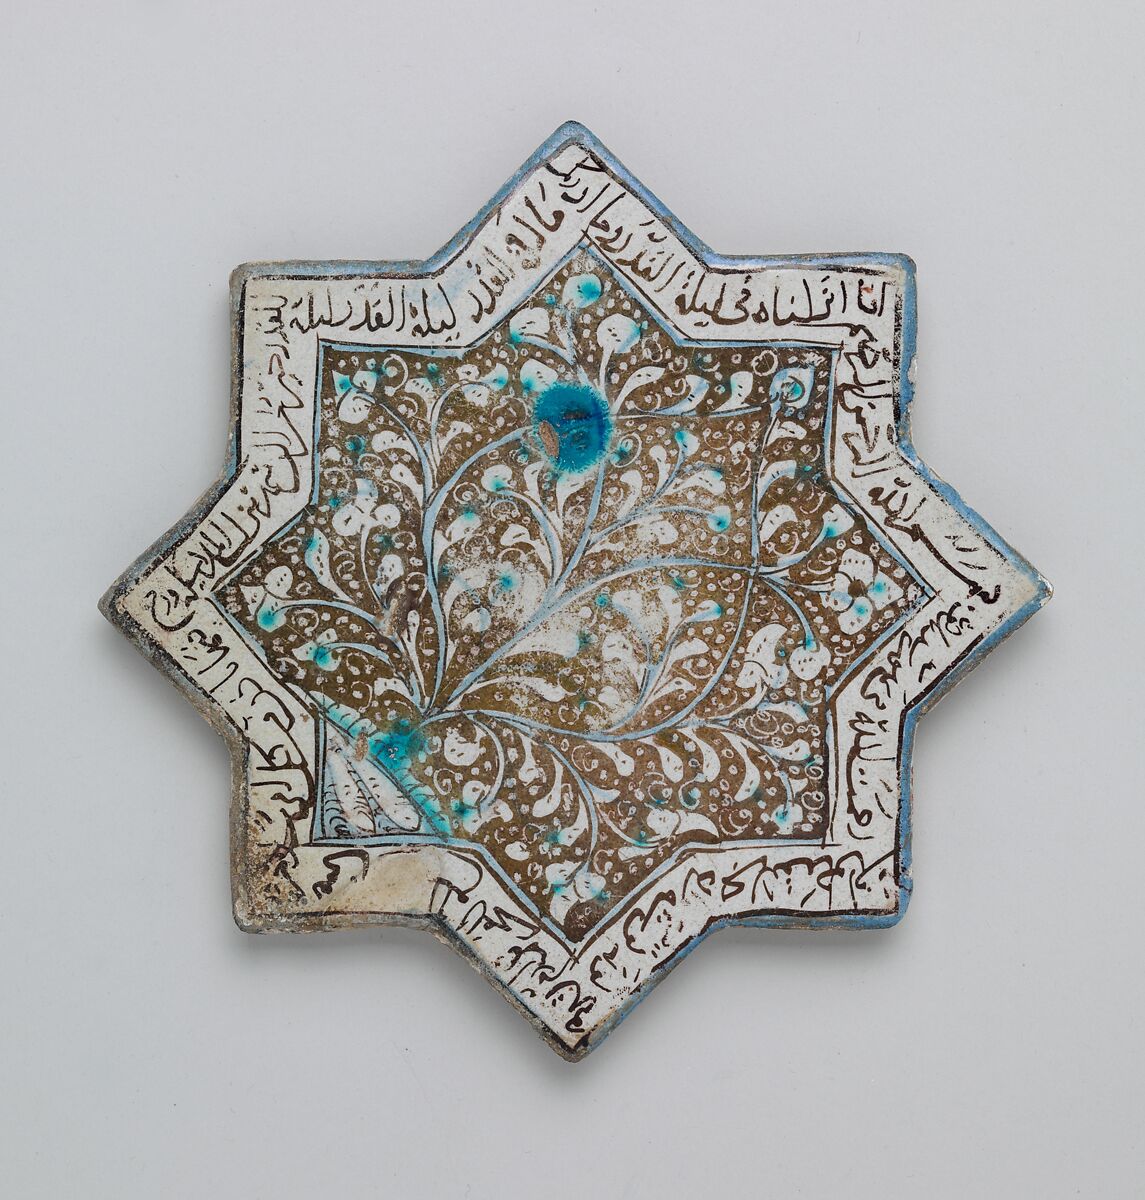 Eight-pointed Star Tile with Foliage and Inscription, Stonepaste; luster-painted on opaque white glaze under transparent glaze 